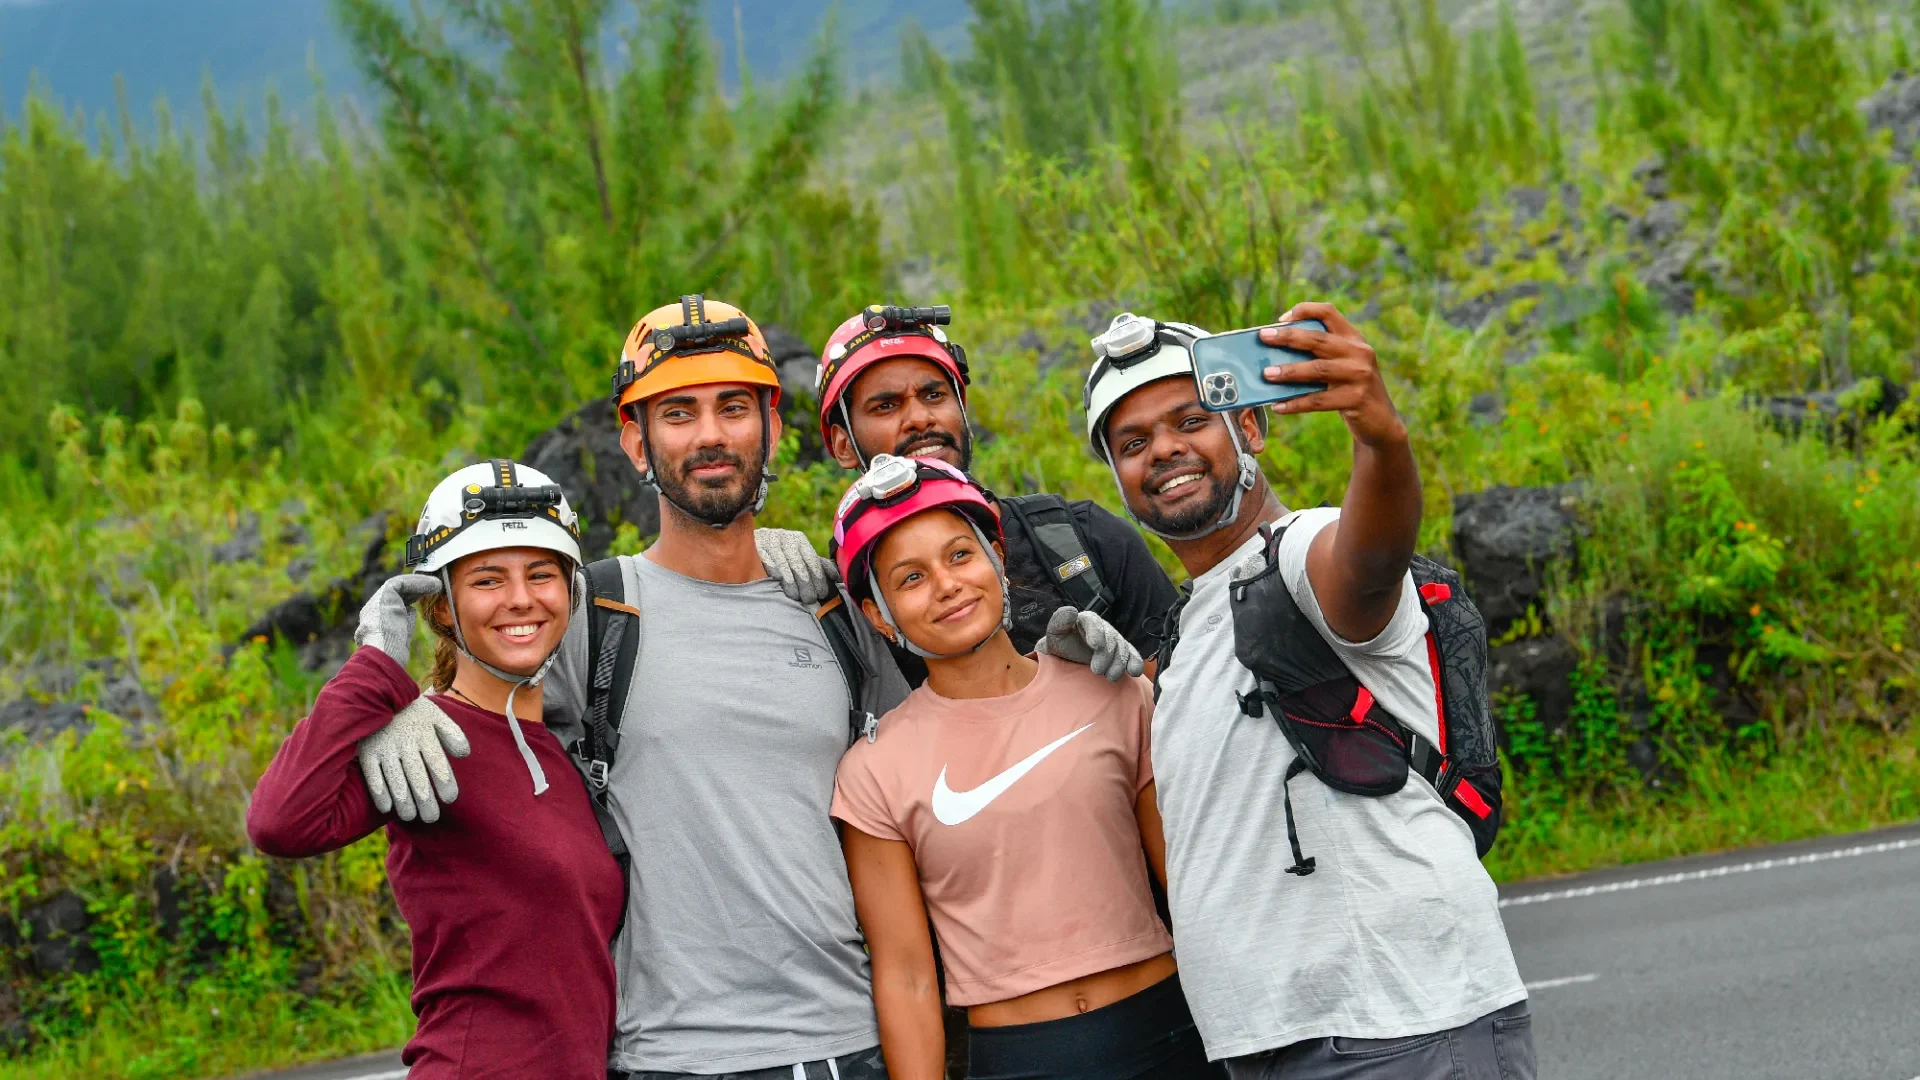 Holidays in the East of Reunion. Group of people taking selfies on the lava road in Sainte-Rose.